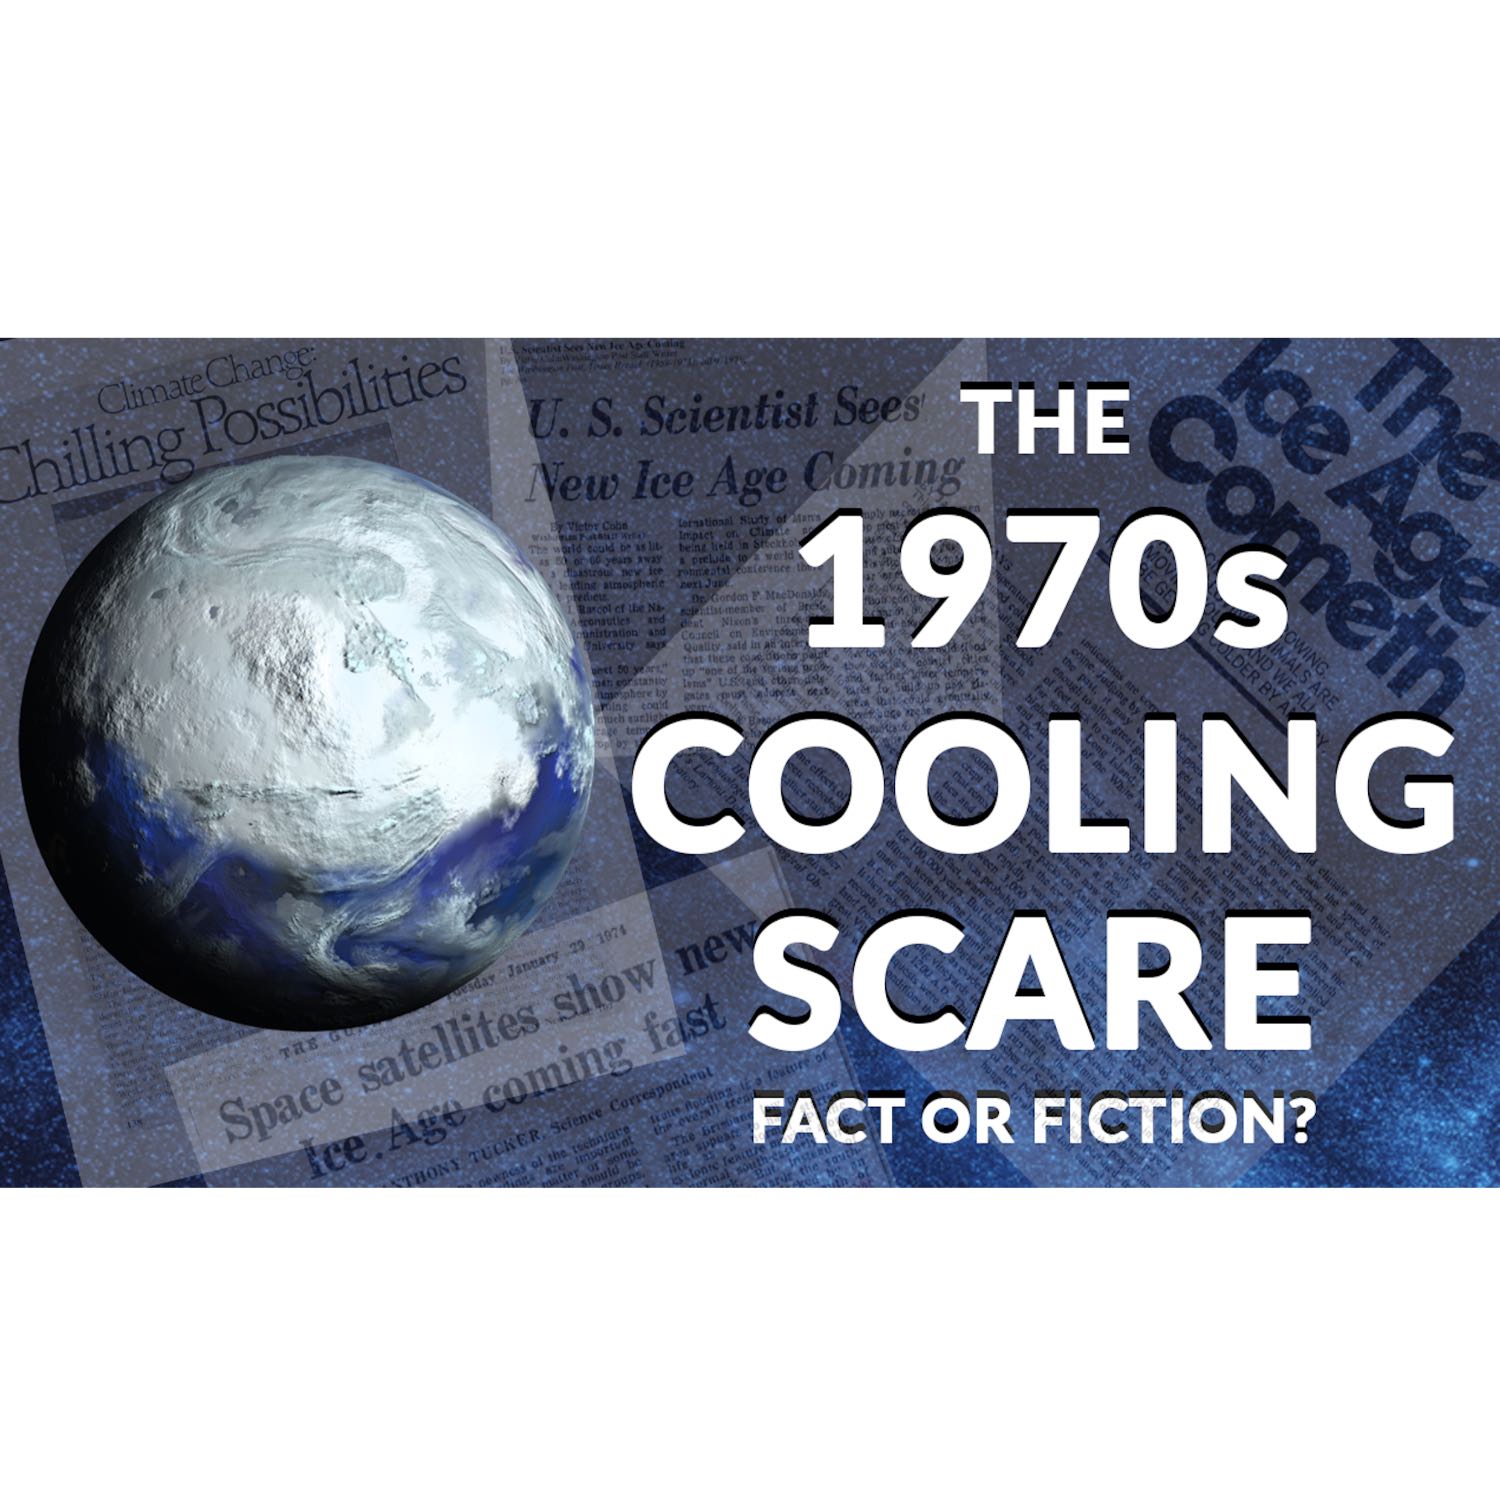 The 1970s Cooling Scare Was Real